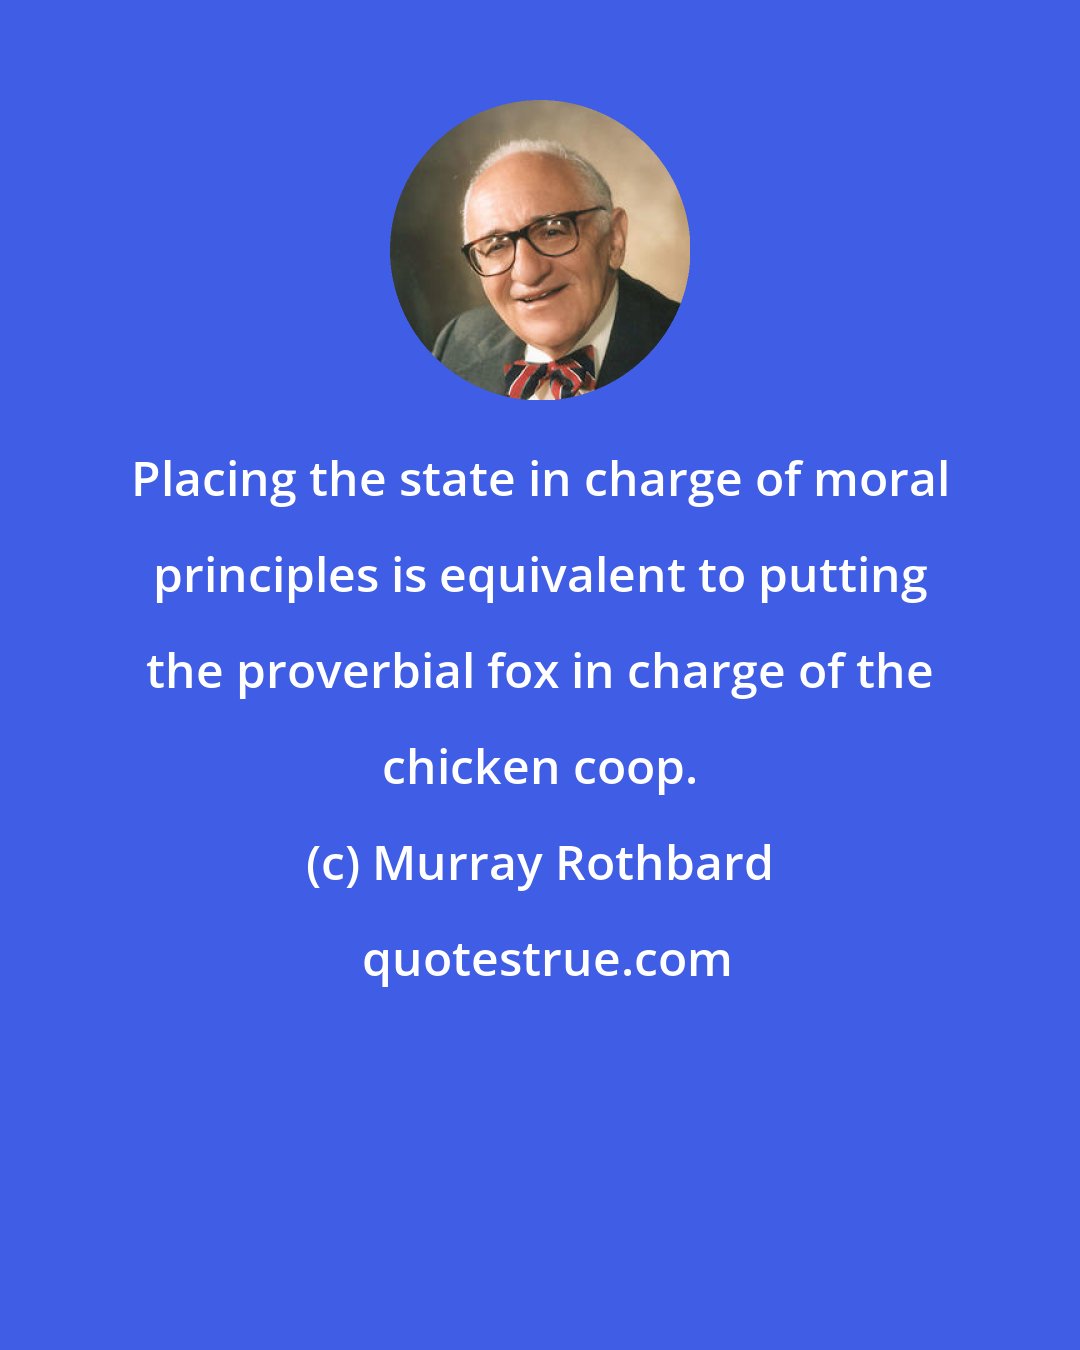 Murray Rothbard: Placing the state in charge of moral principles is equivalent to putting the proverbial fox in charge of the chicken coop.